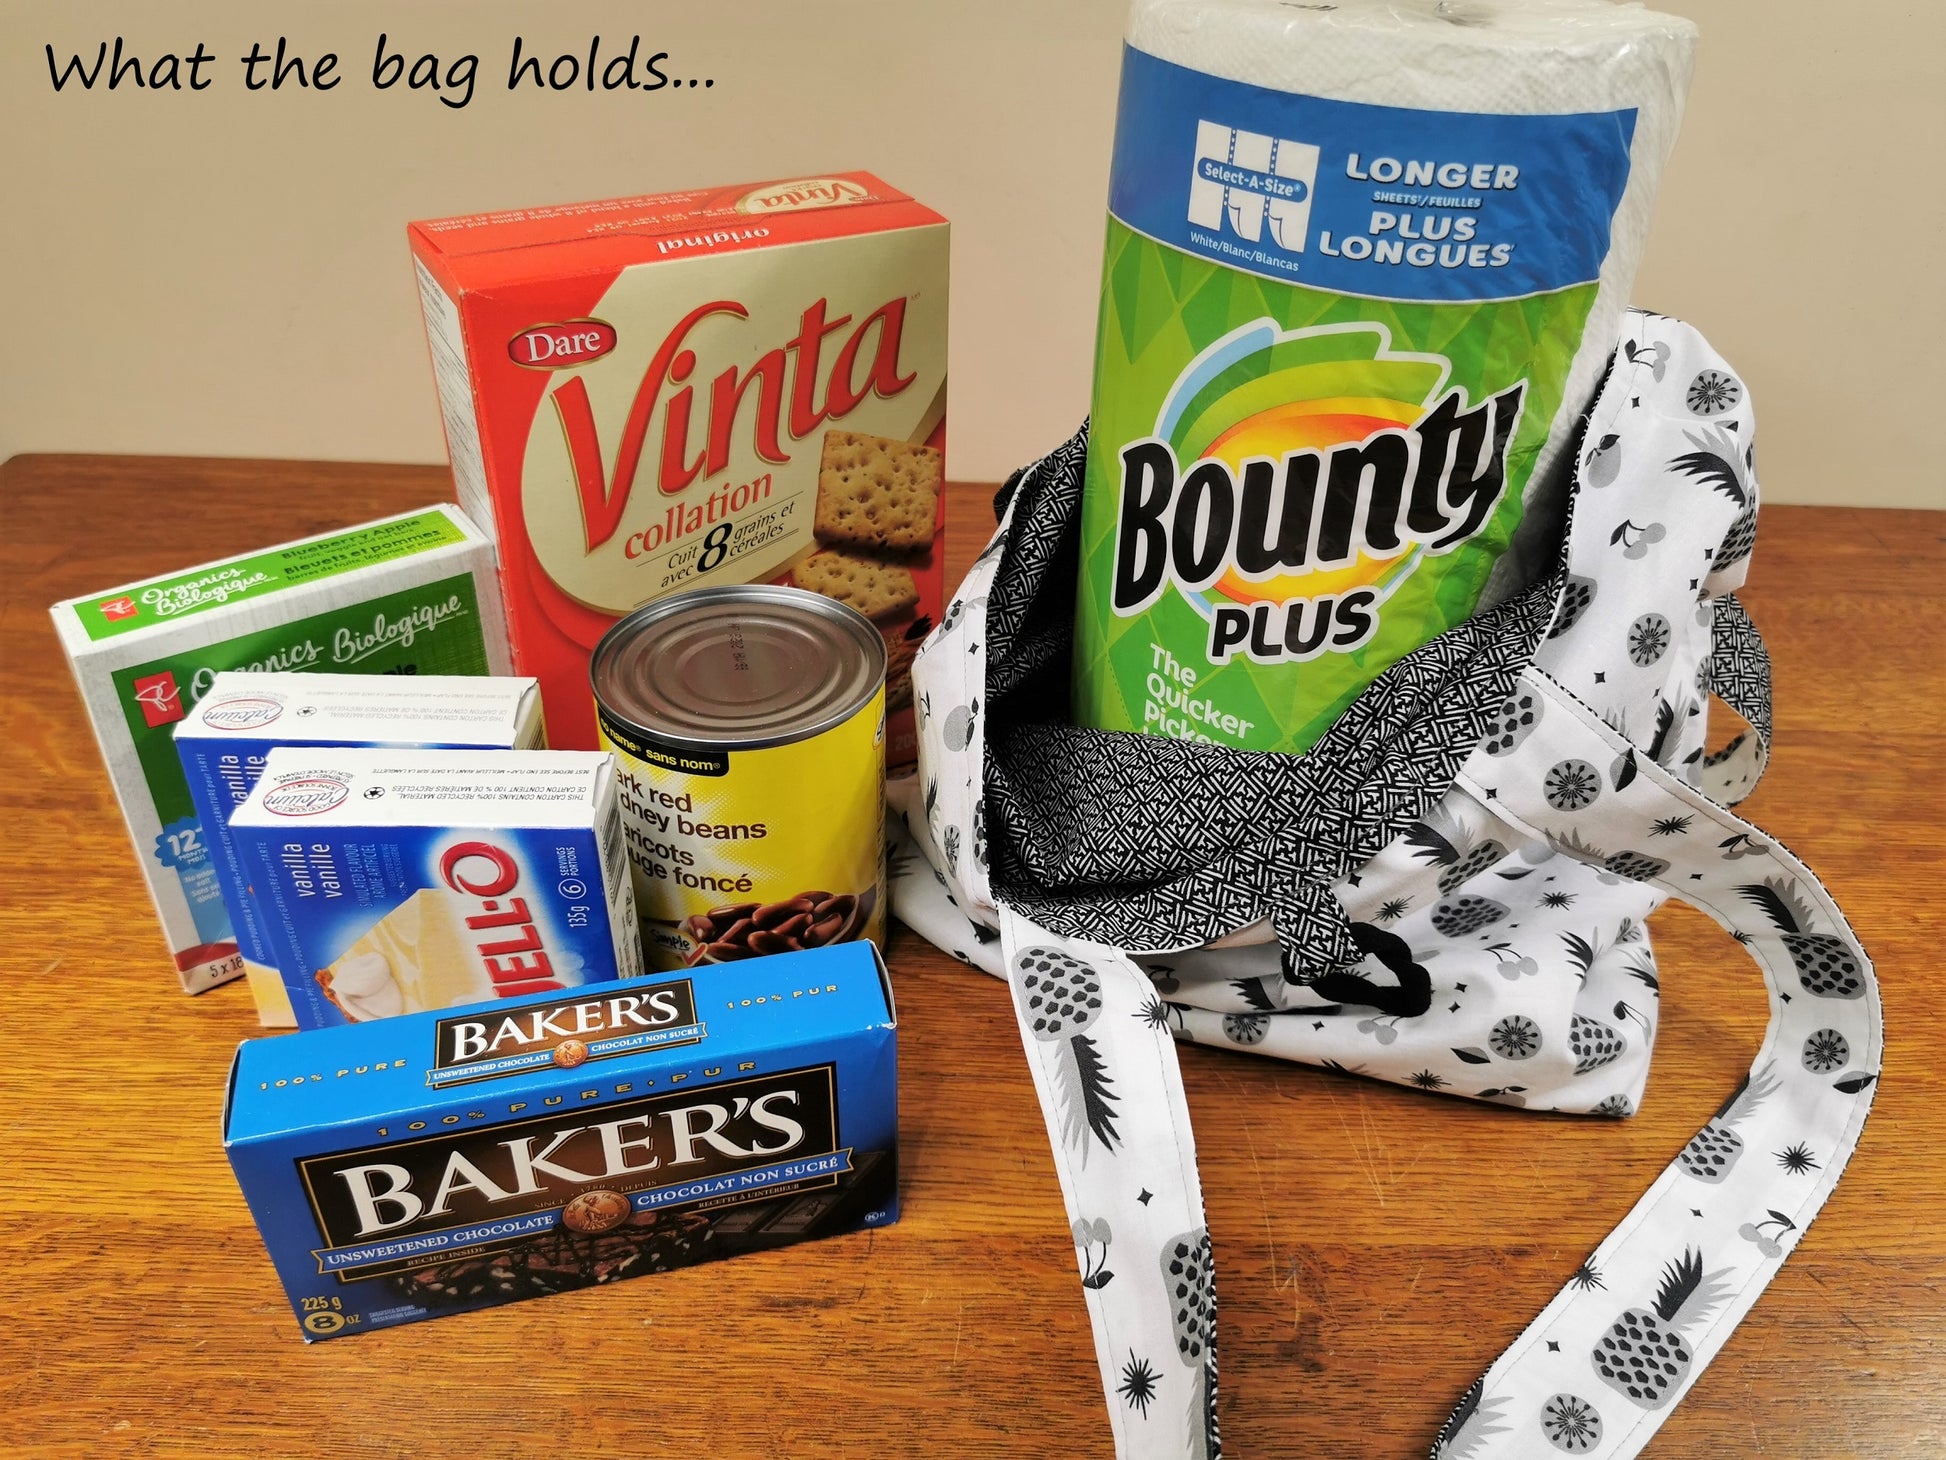 Bag holds all of the following grocery items: Large roll Bounty paper towels, box Vinta crackers, can of kidney beans, two boxes of Jello pudding mix, small box fruit snack bars, box of Bakers unsweetened chocolate squares.